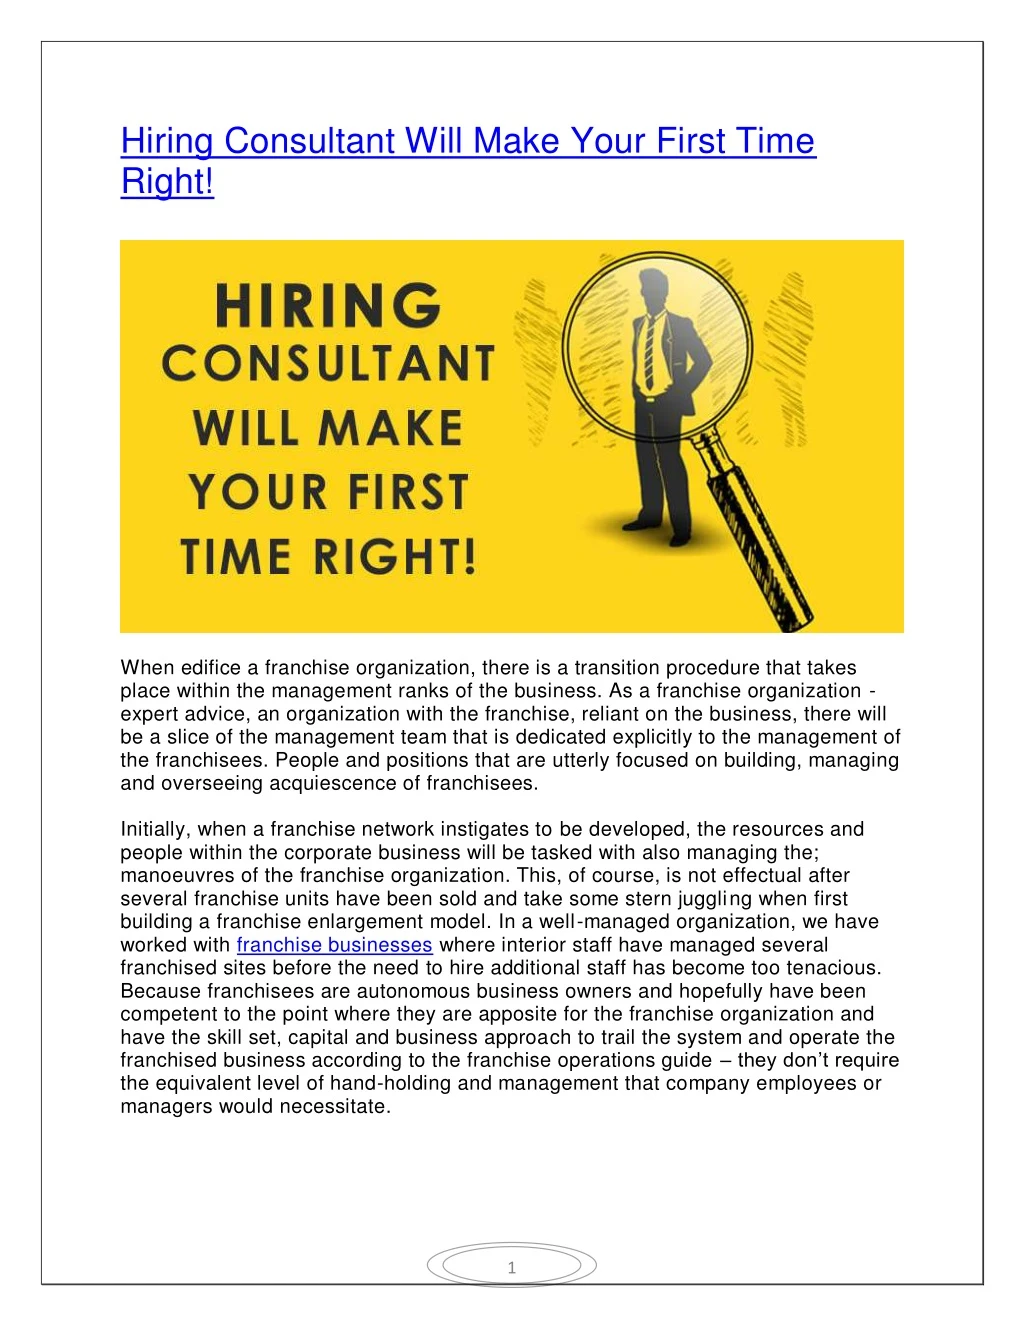 hiring consultant will make your first time right